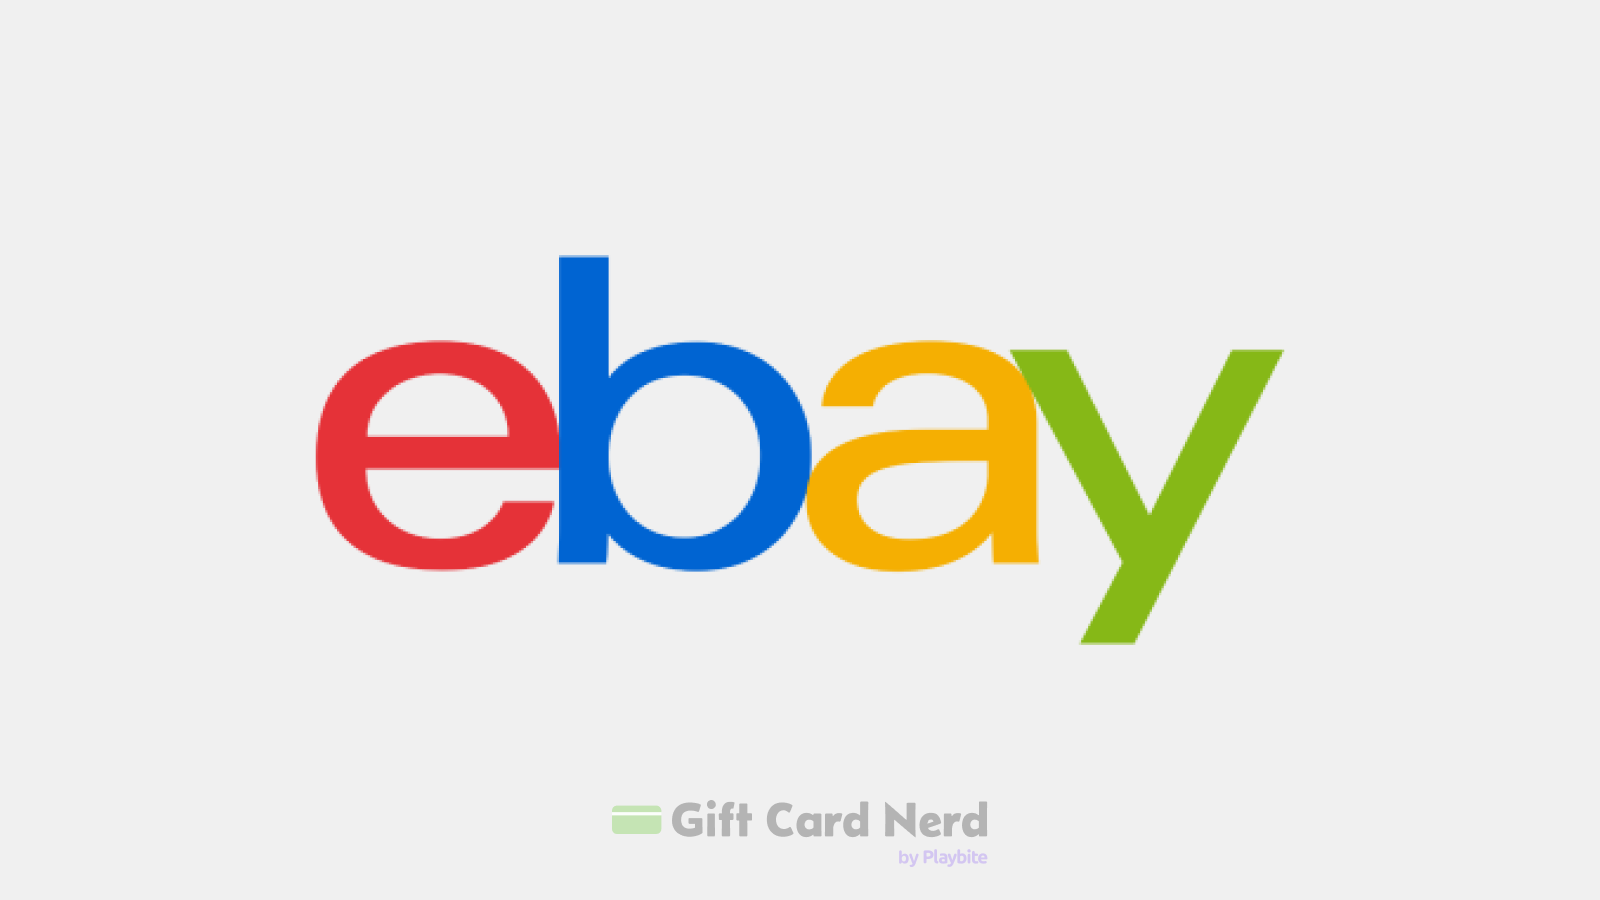 Can You Use an eBay Gift Card on Uber Eats?